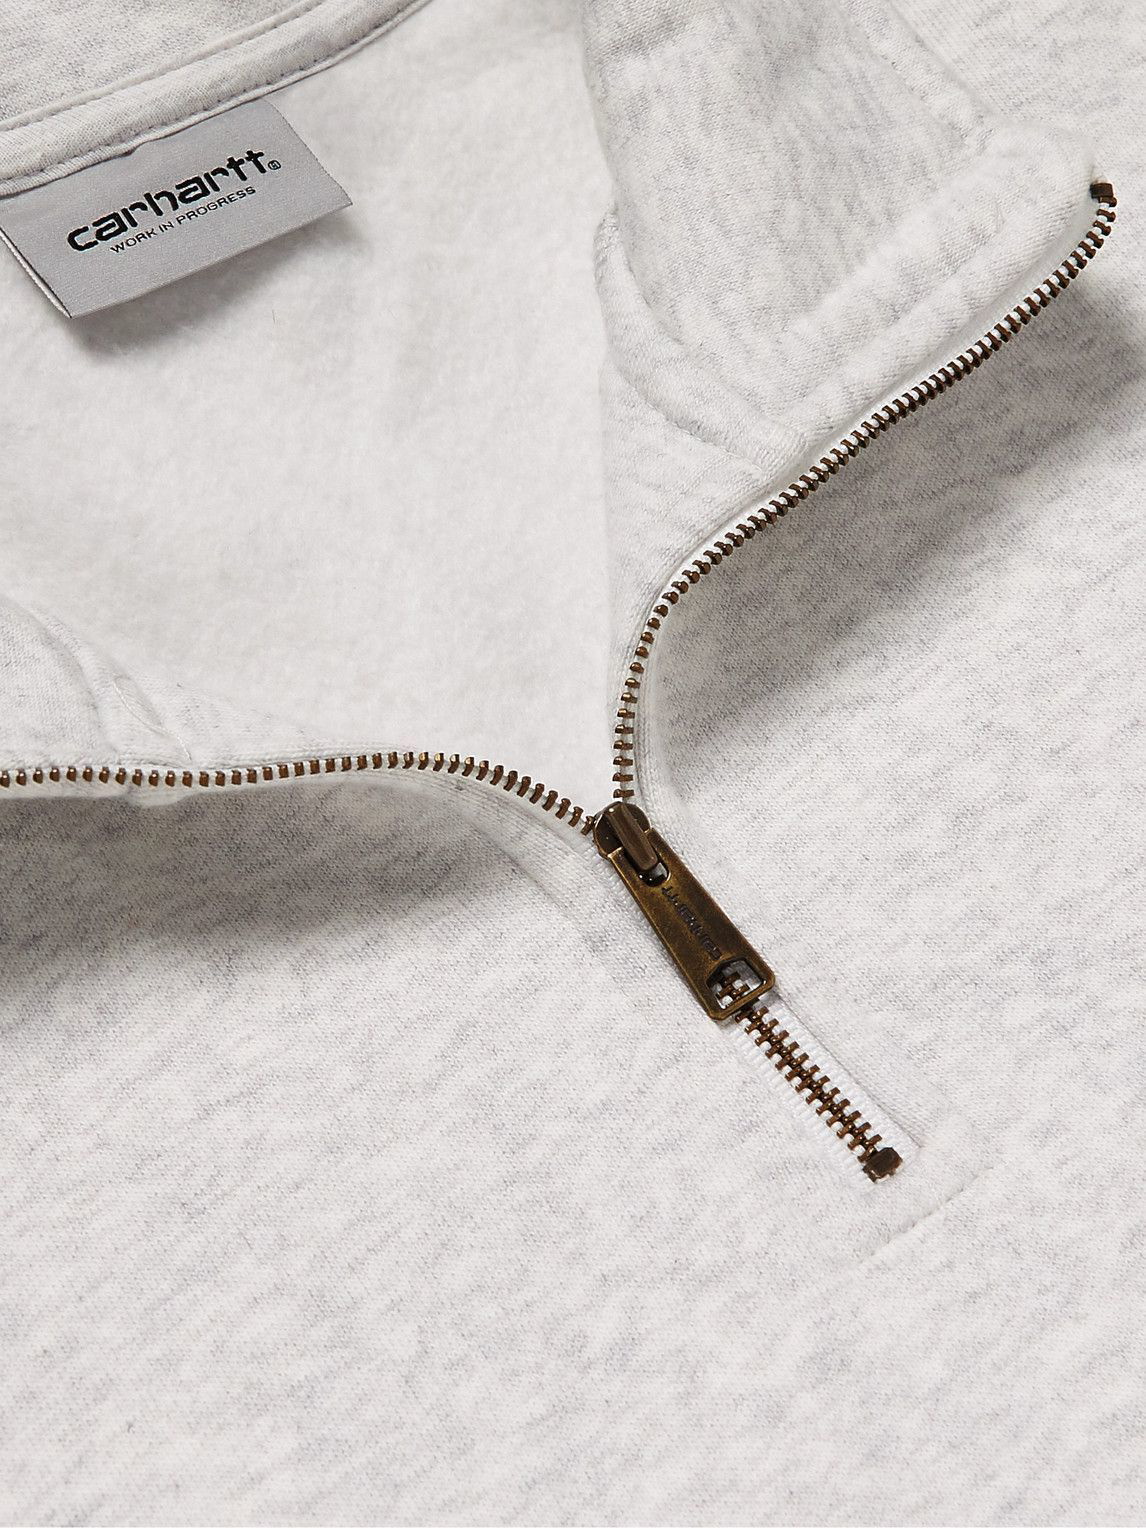 CARHARTT WIP Chase Logo-Embroidered Cotton-Blend Jersey Hoodie for